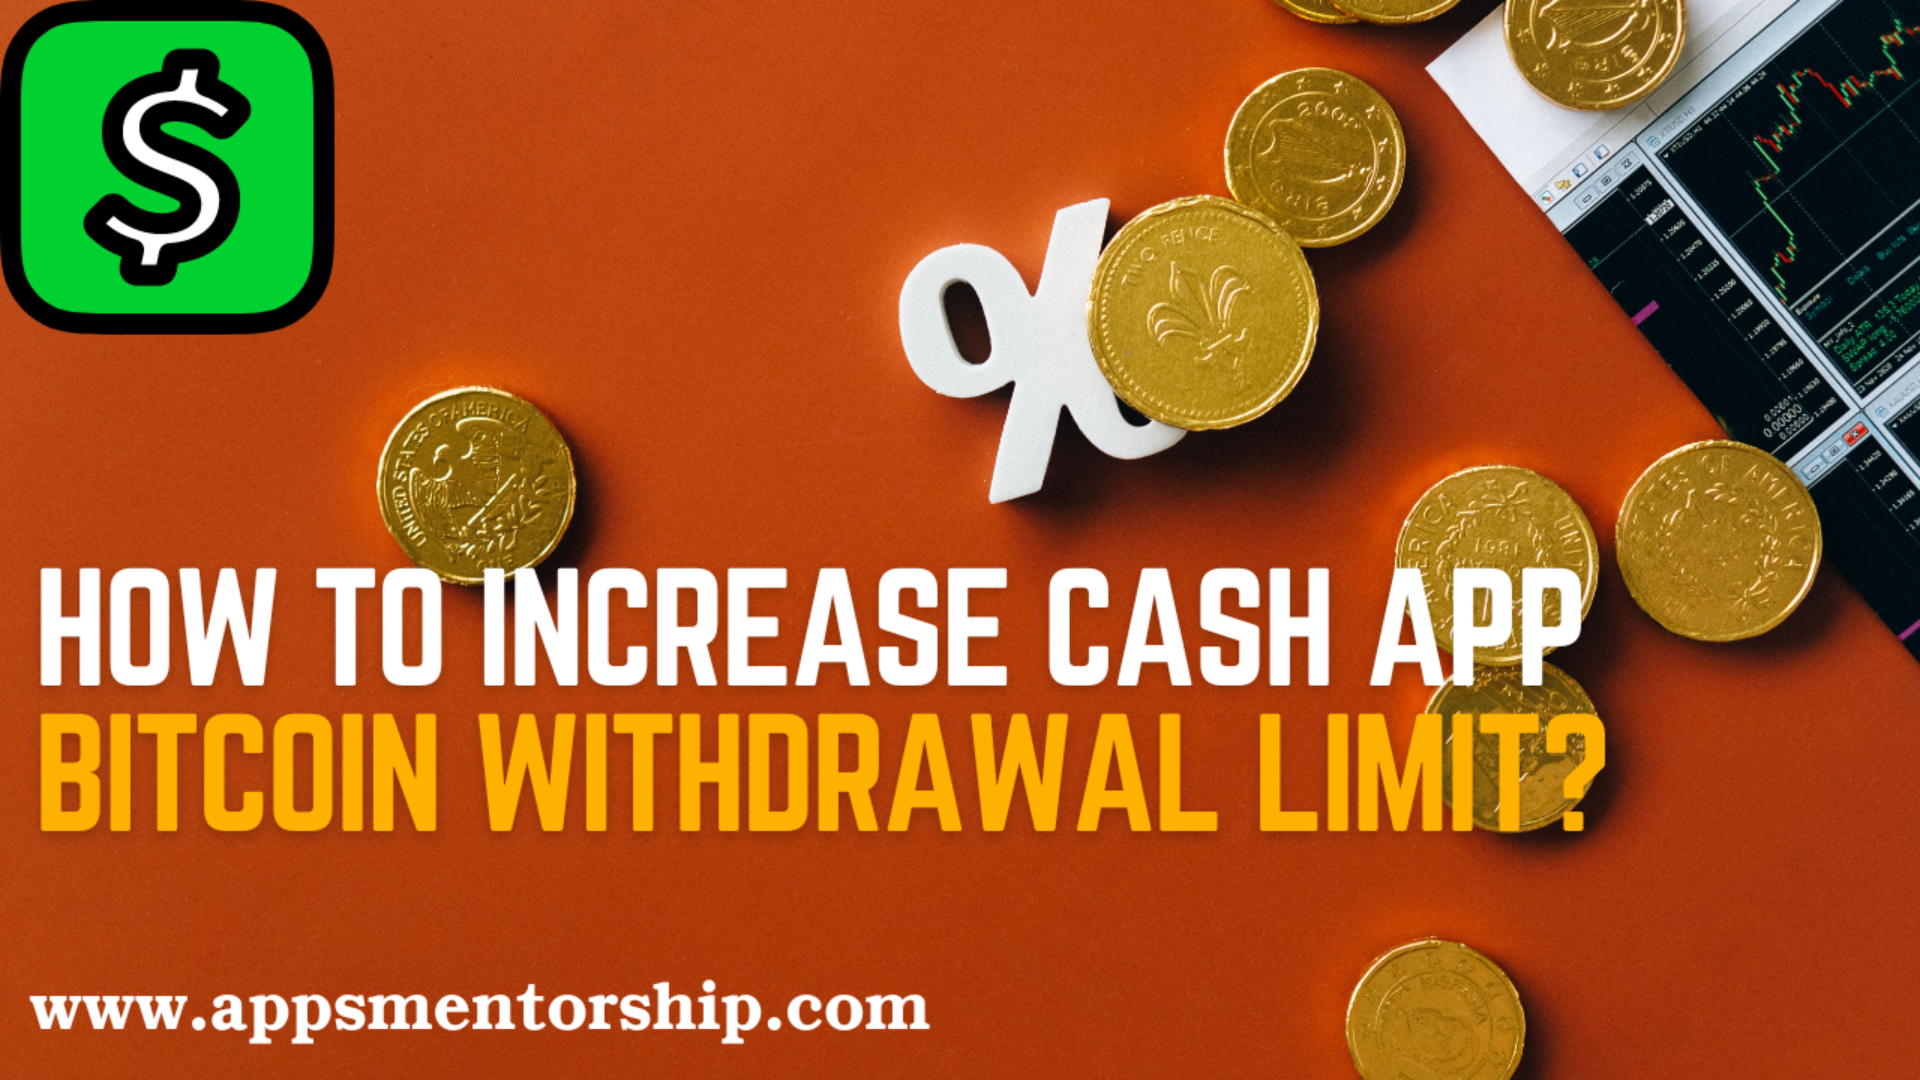 How can I increase my Cash App Bitcoin withdrawal limit?